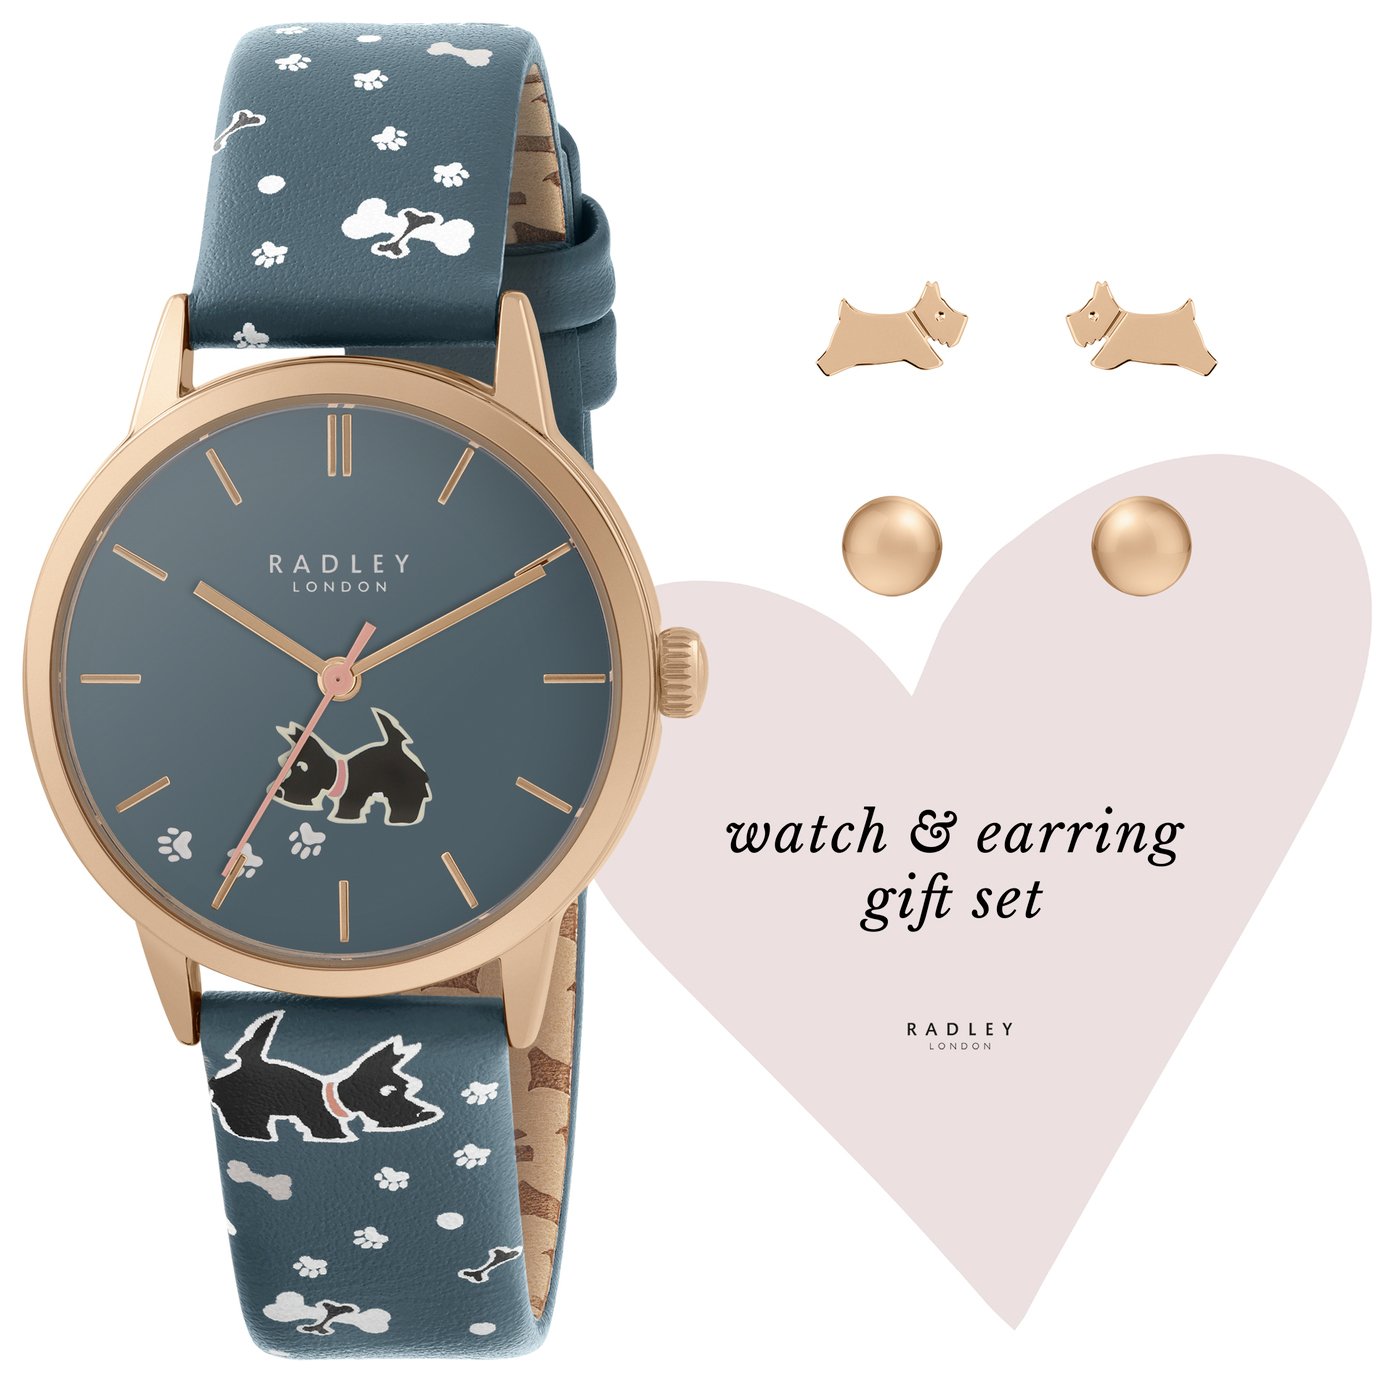 Radley Printed Leather Strap Watch and Earring Gift Set